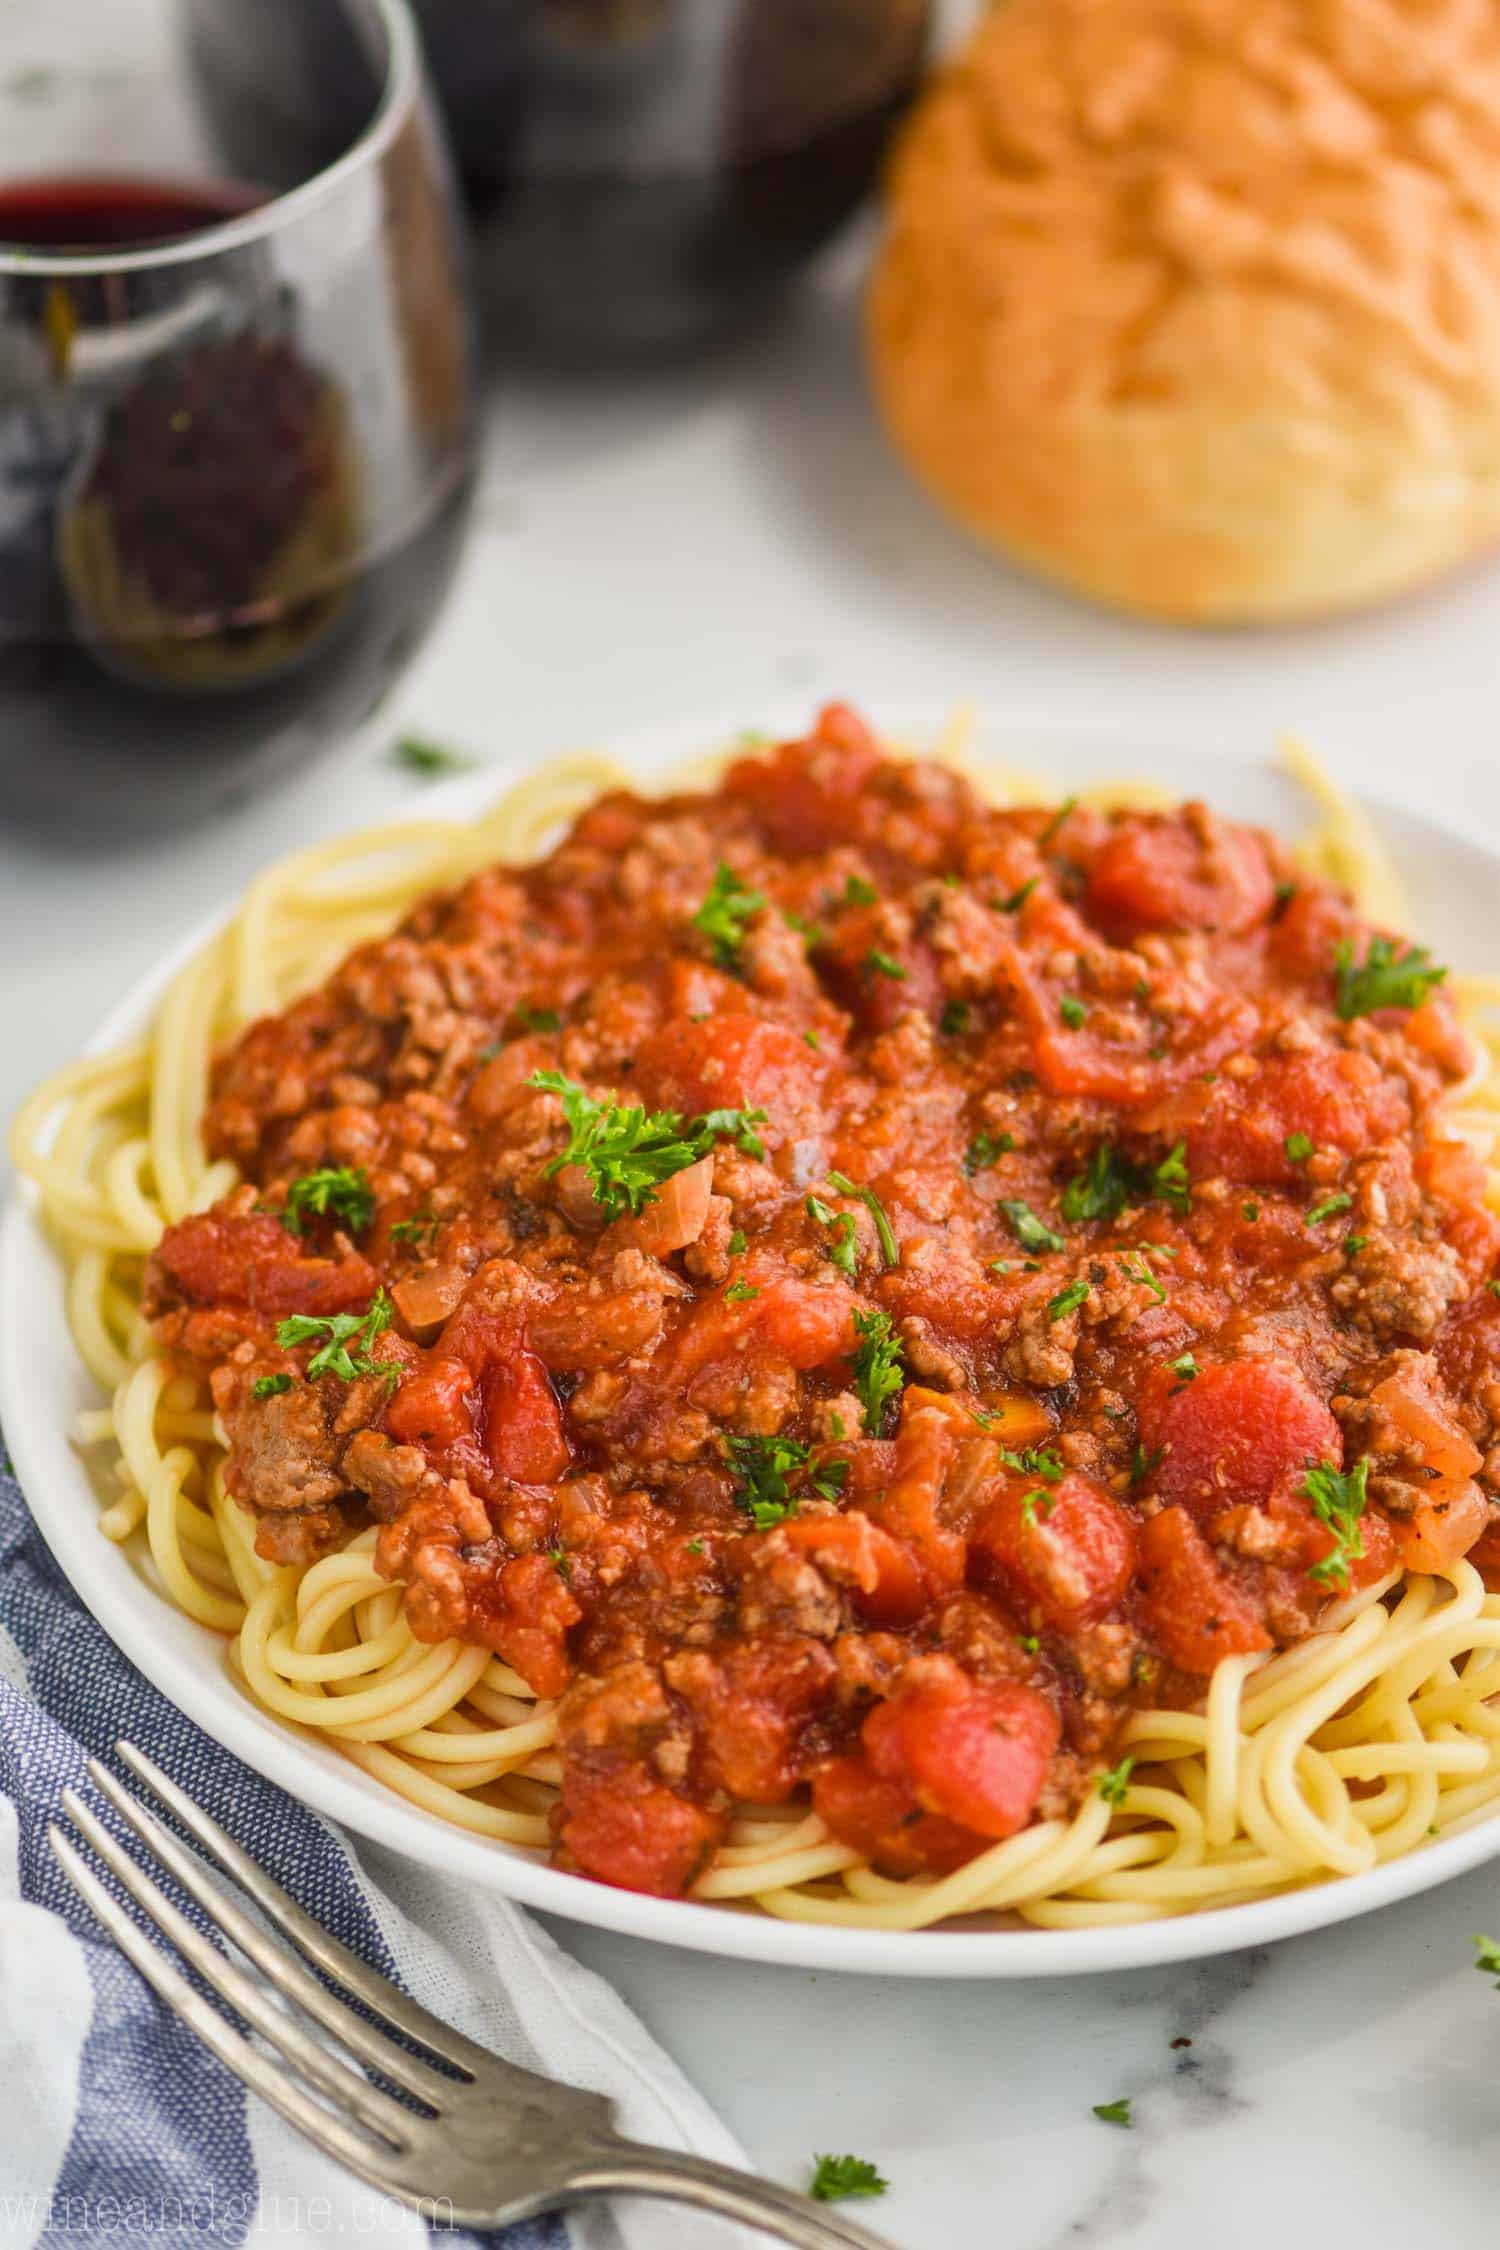 Best Spaghetti Recipe with Homemade Meat Sauce